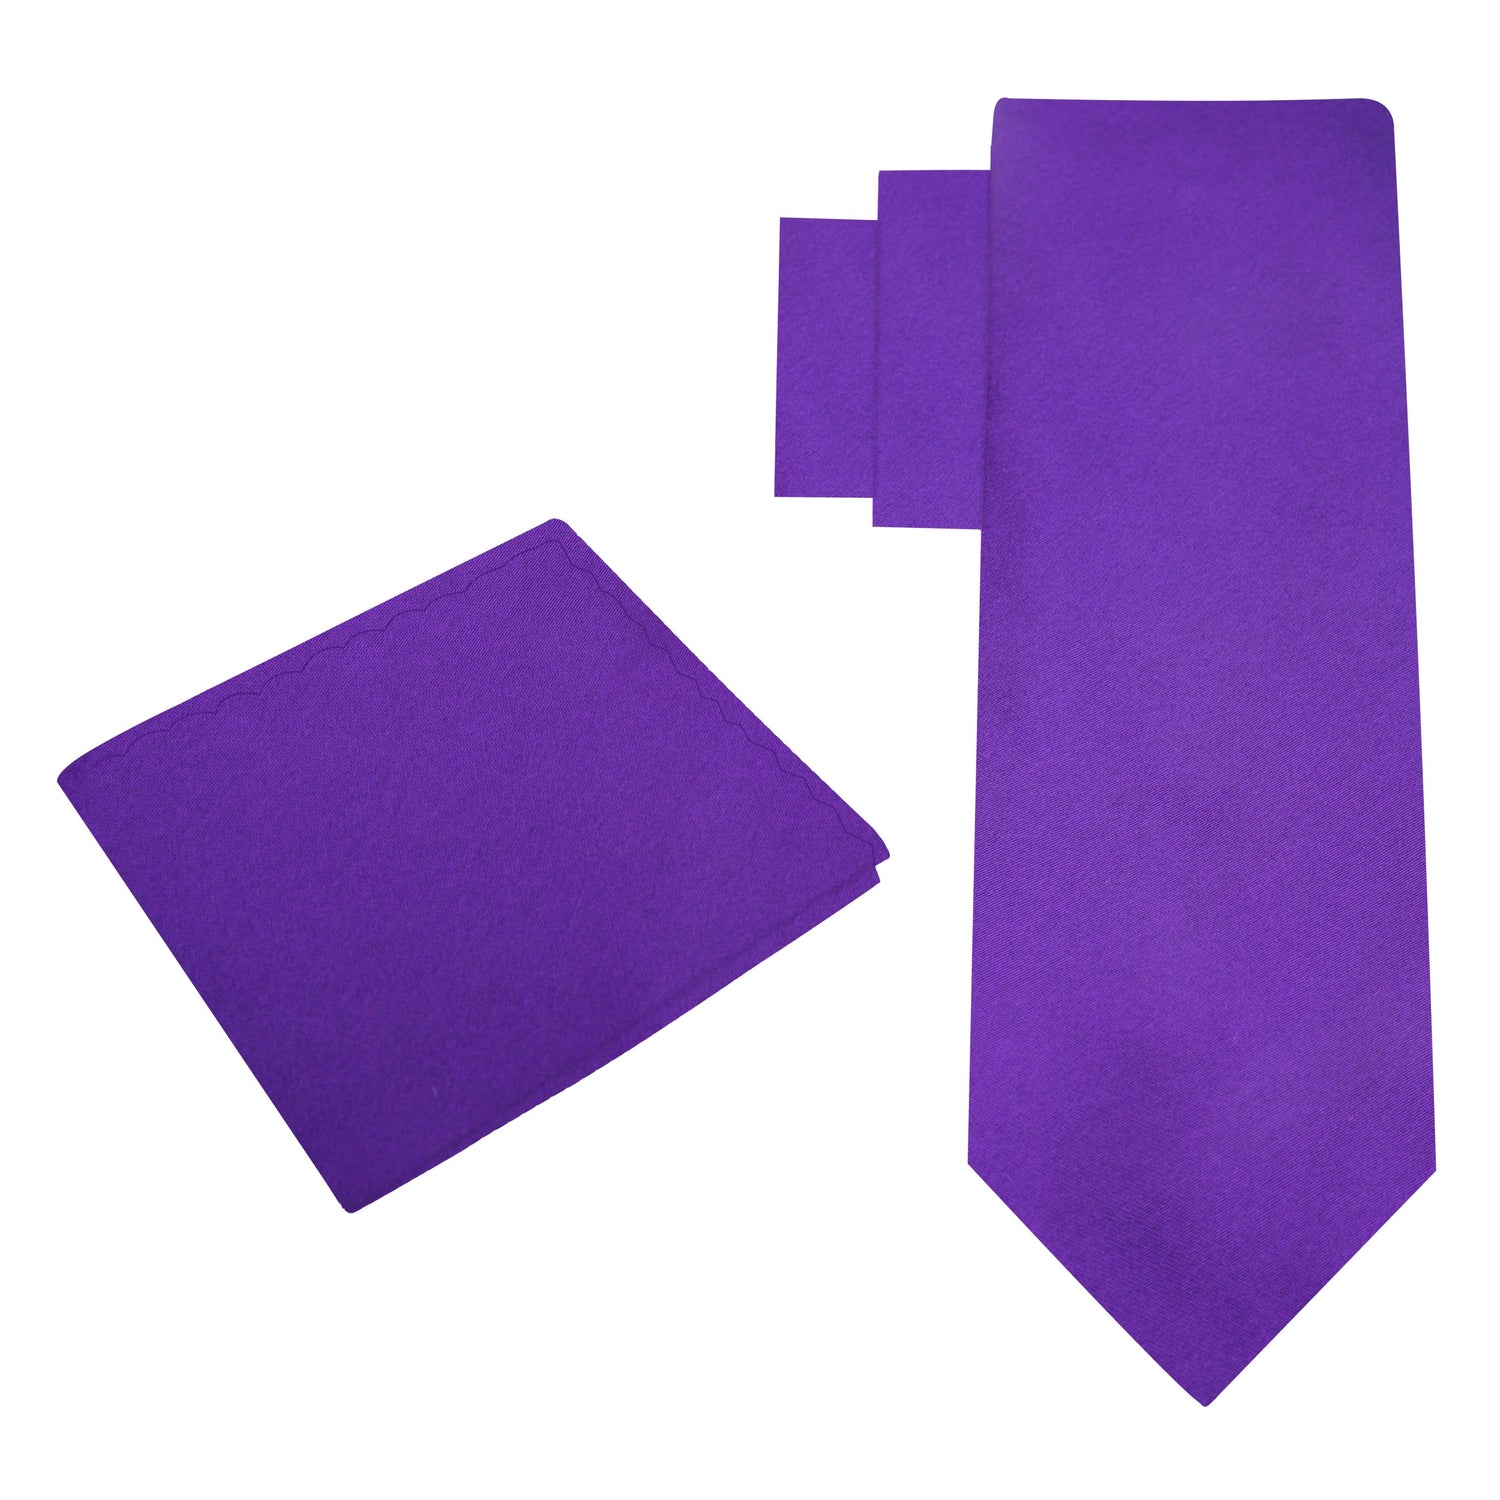 Alt View: Purple Tie with Accenting Black, White and Square